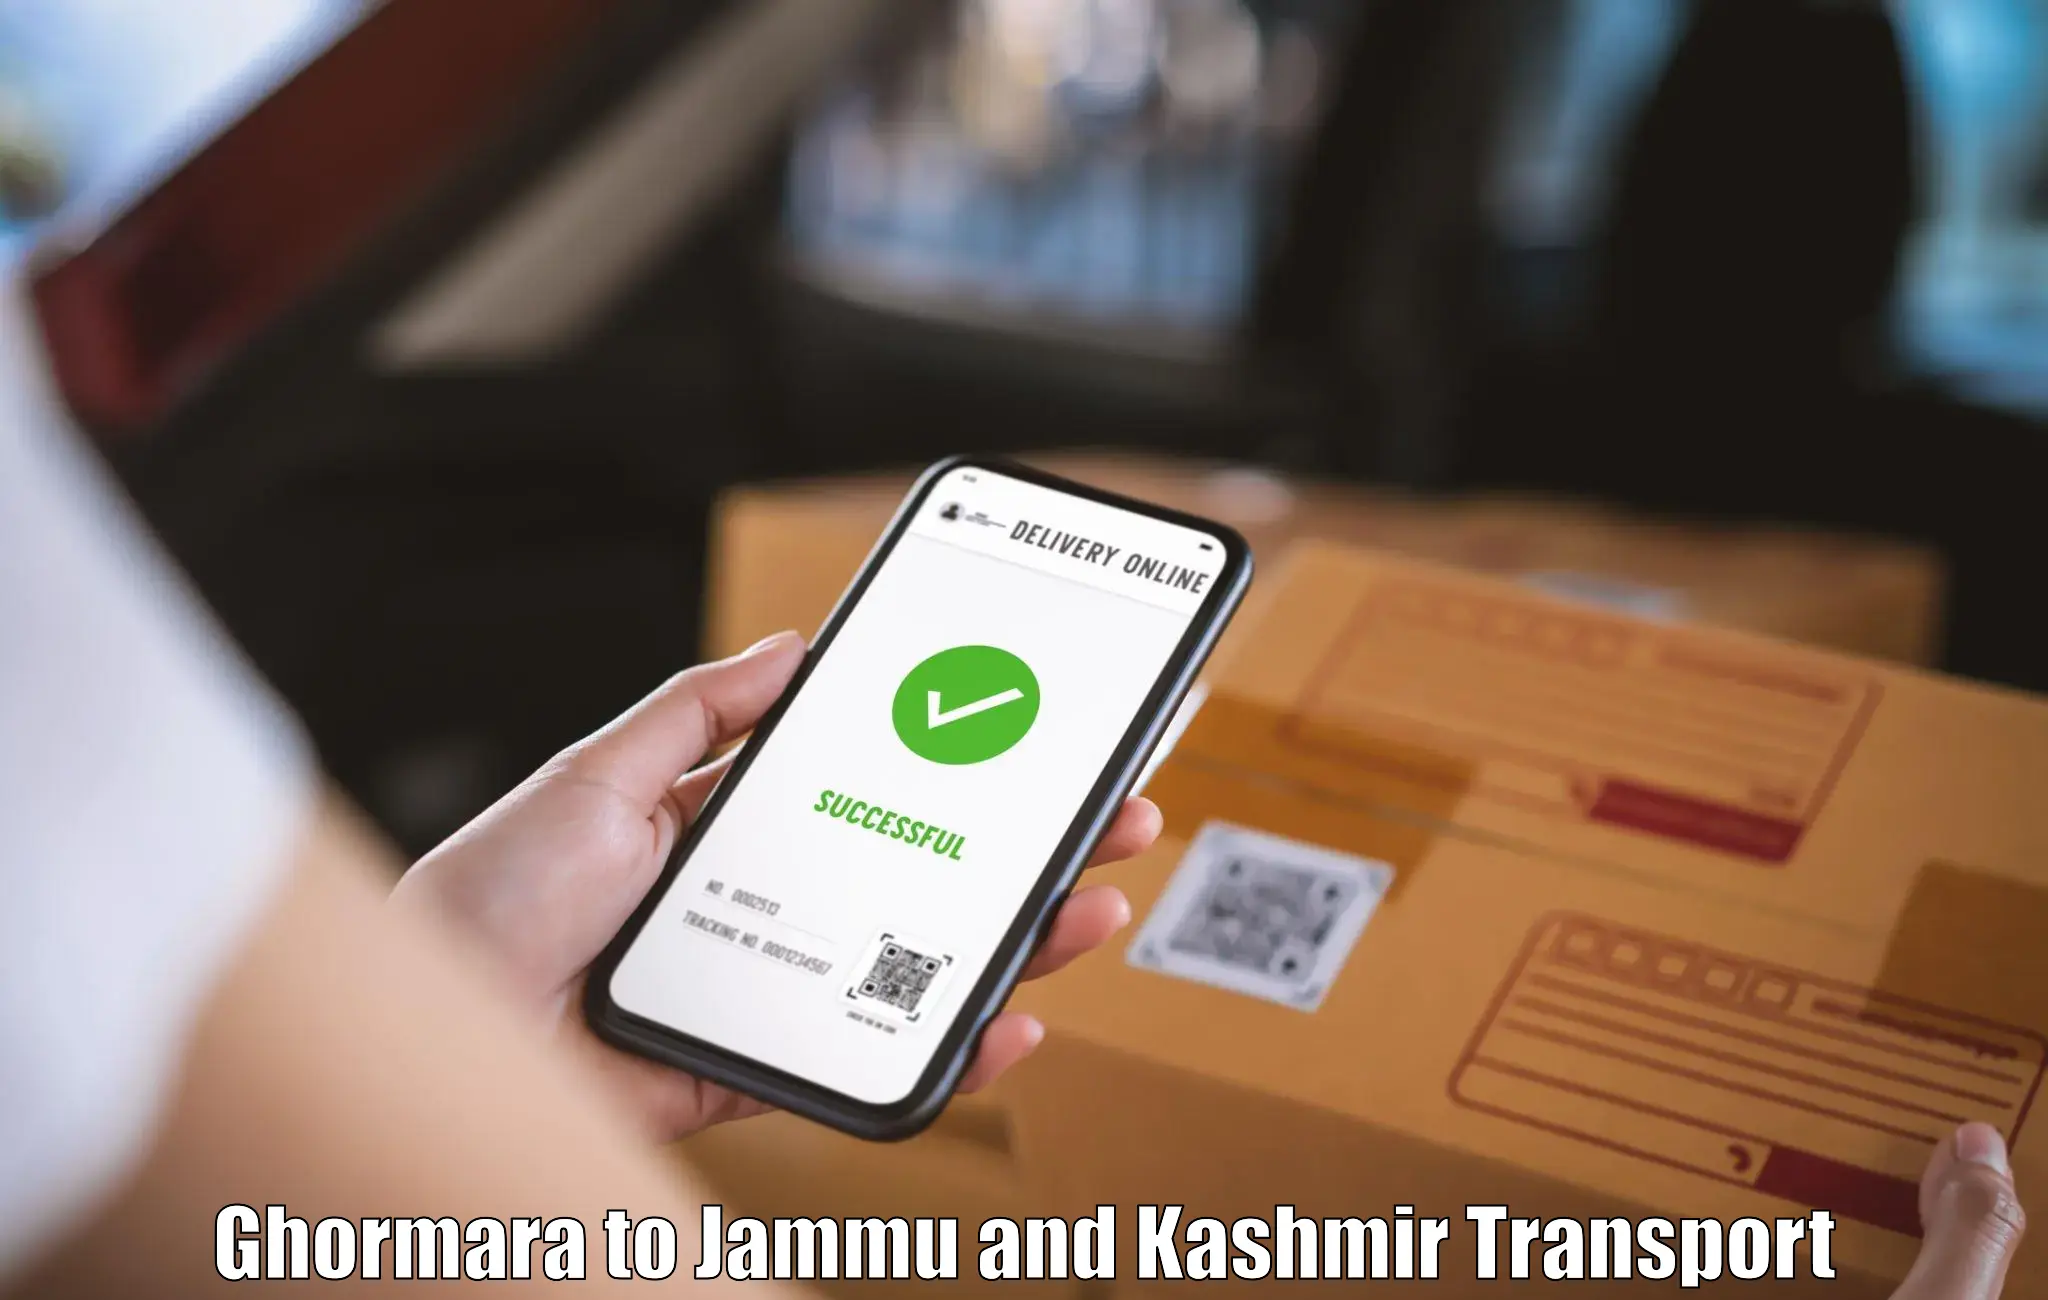 Commercial transport service Ghormara to Pulwama